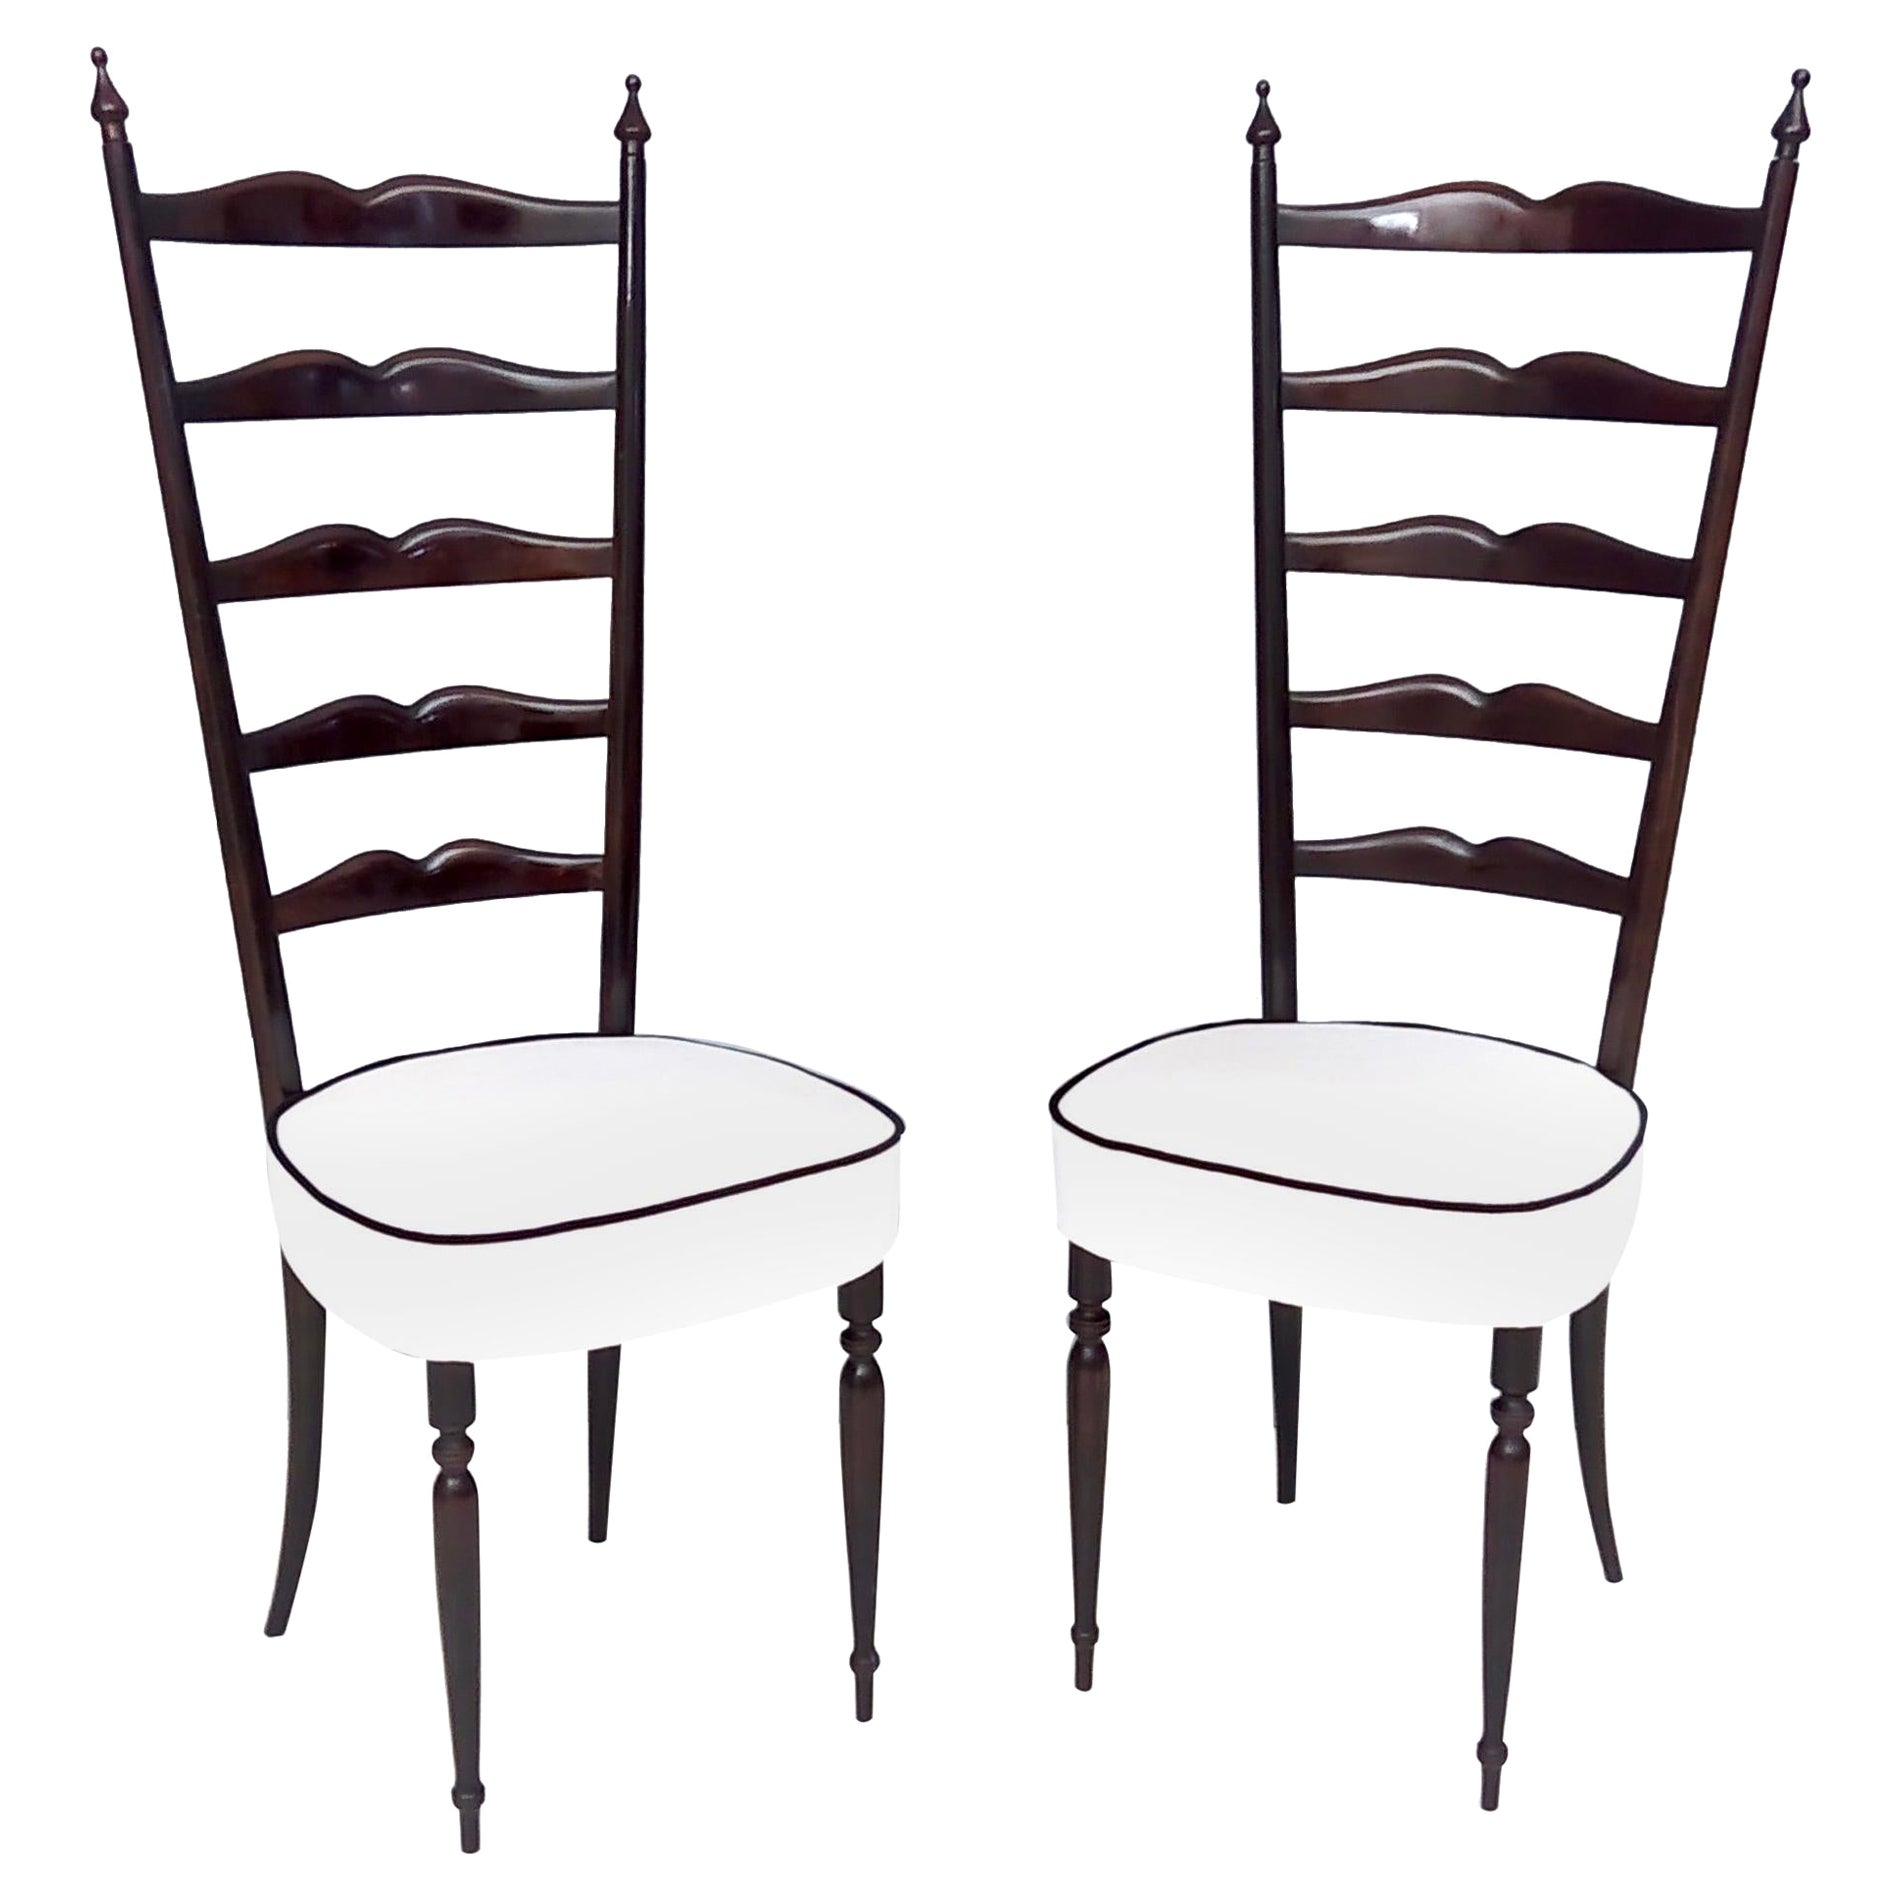 Pair of Vintage Ebonized Beech Chiavarine Chairs with White Upholstery, Italy